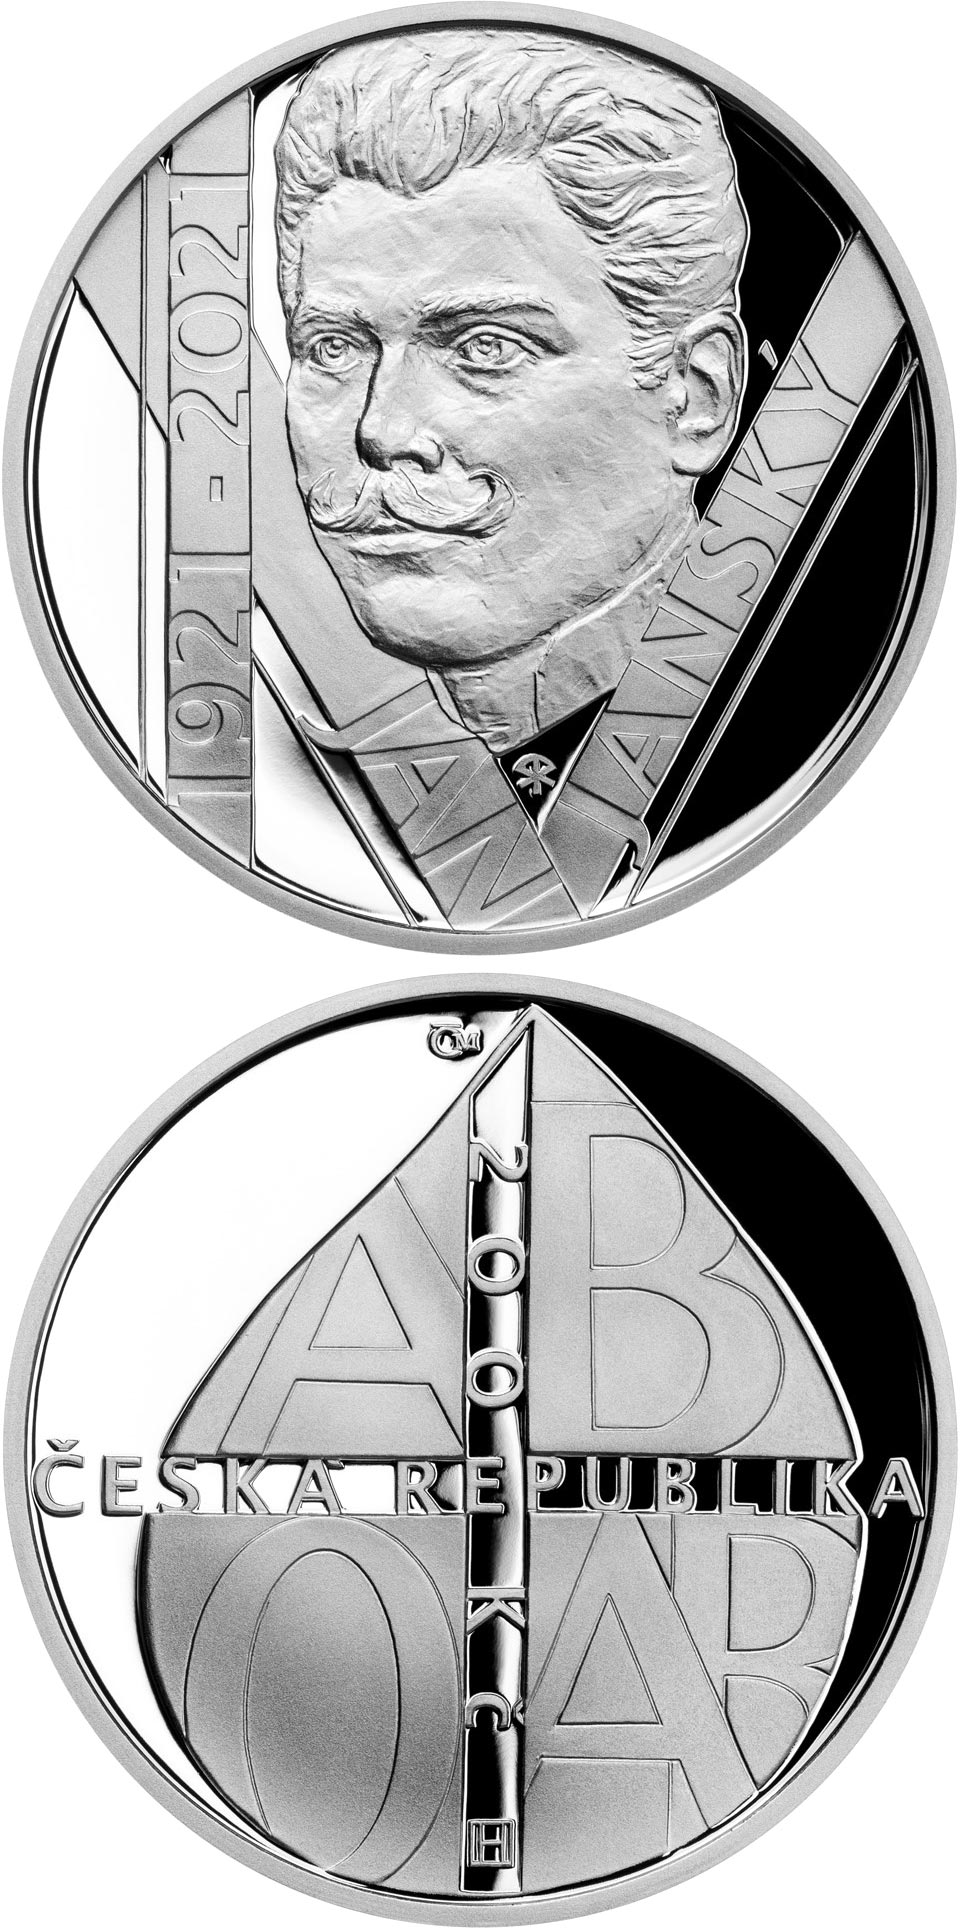 Image of 200 koruna coin - 100th Anniversary of the Death of Jan Janský | Czech Republic 2021.  The Silver coin is of Proof, BU quality.